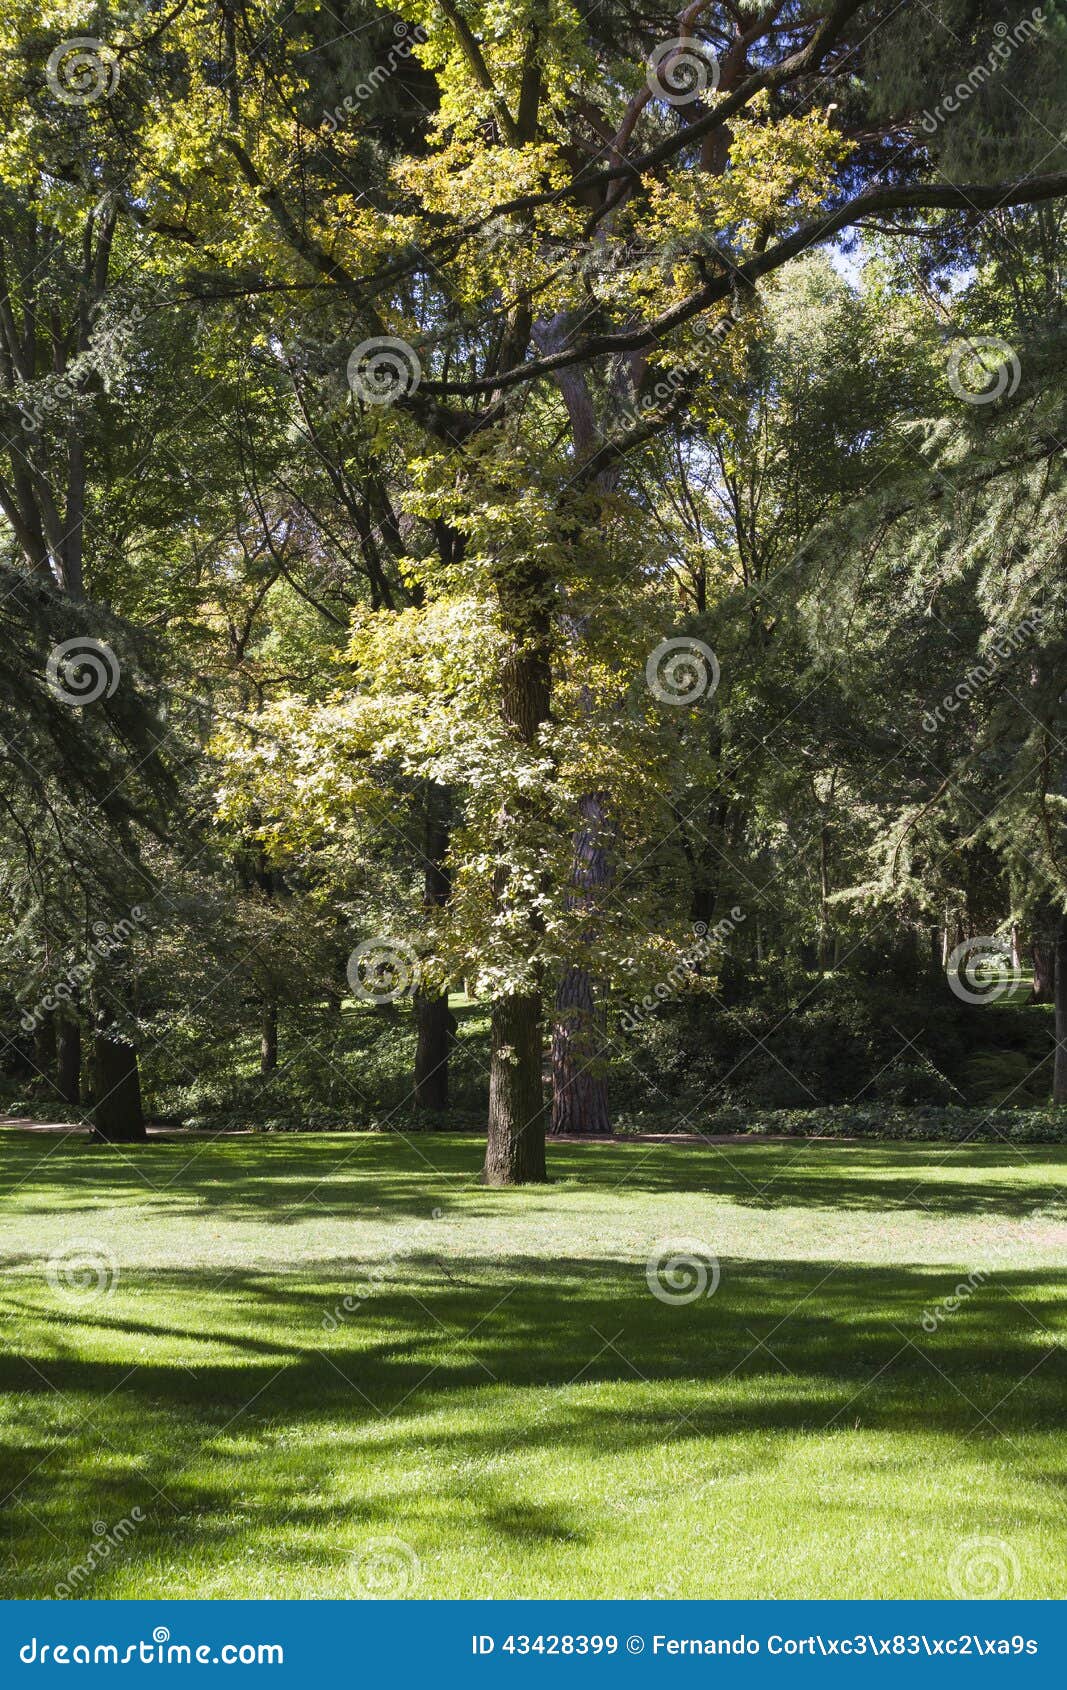 Outdoor, Beautiful Park with Leafy Trees Stock Image - Image of meadow ...